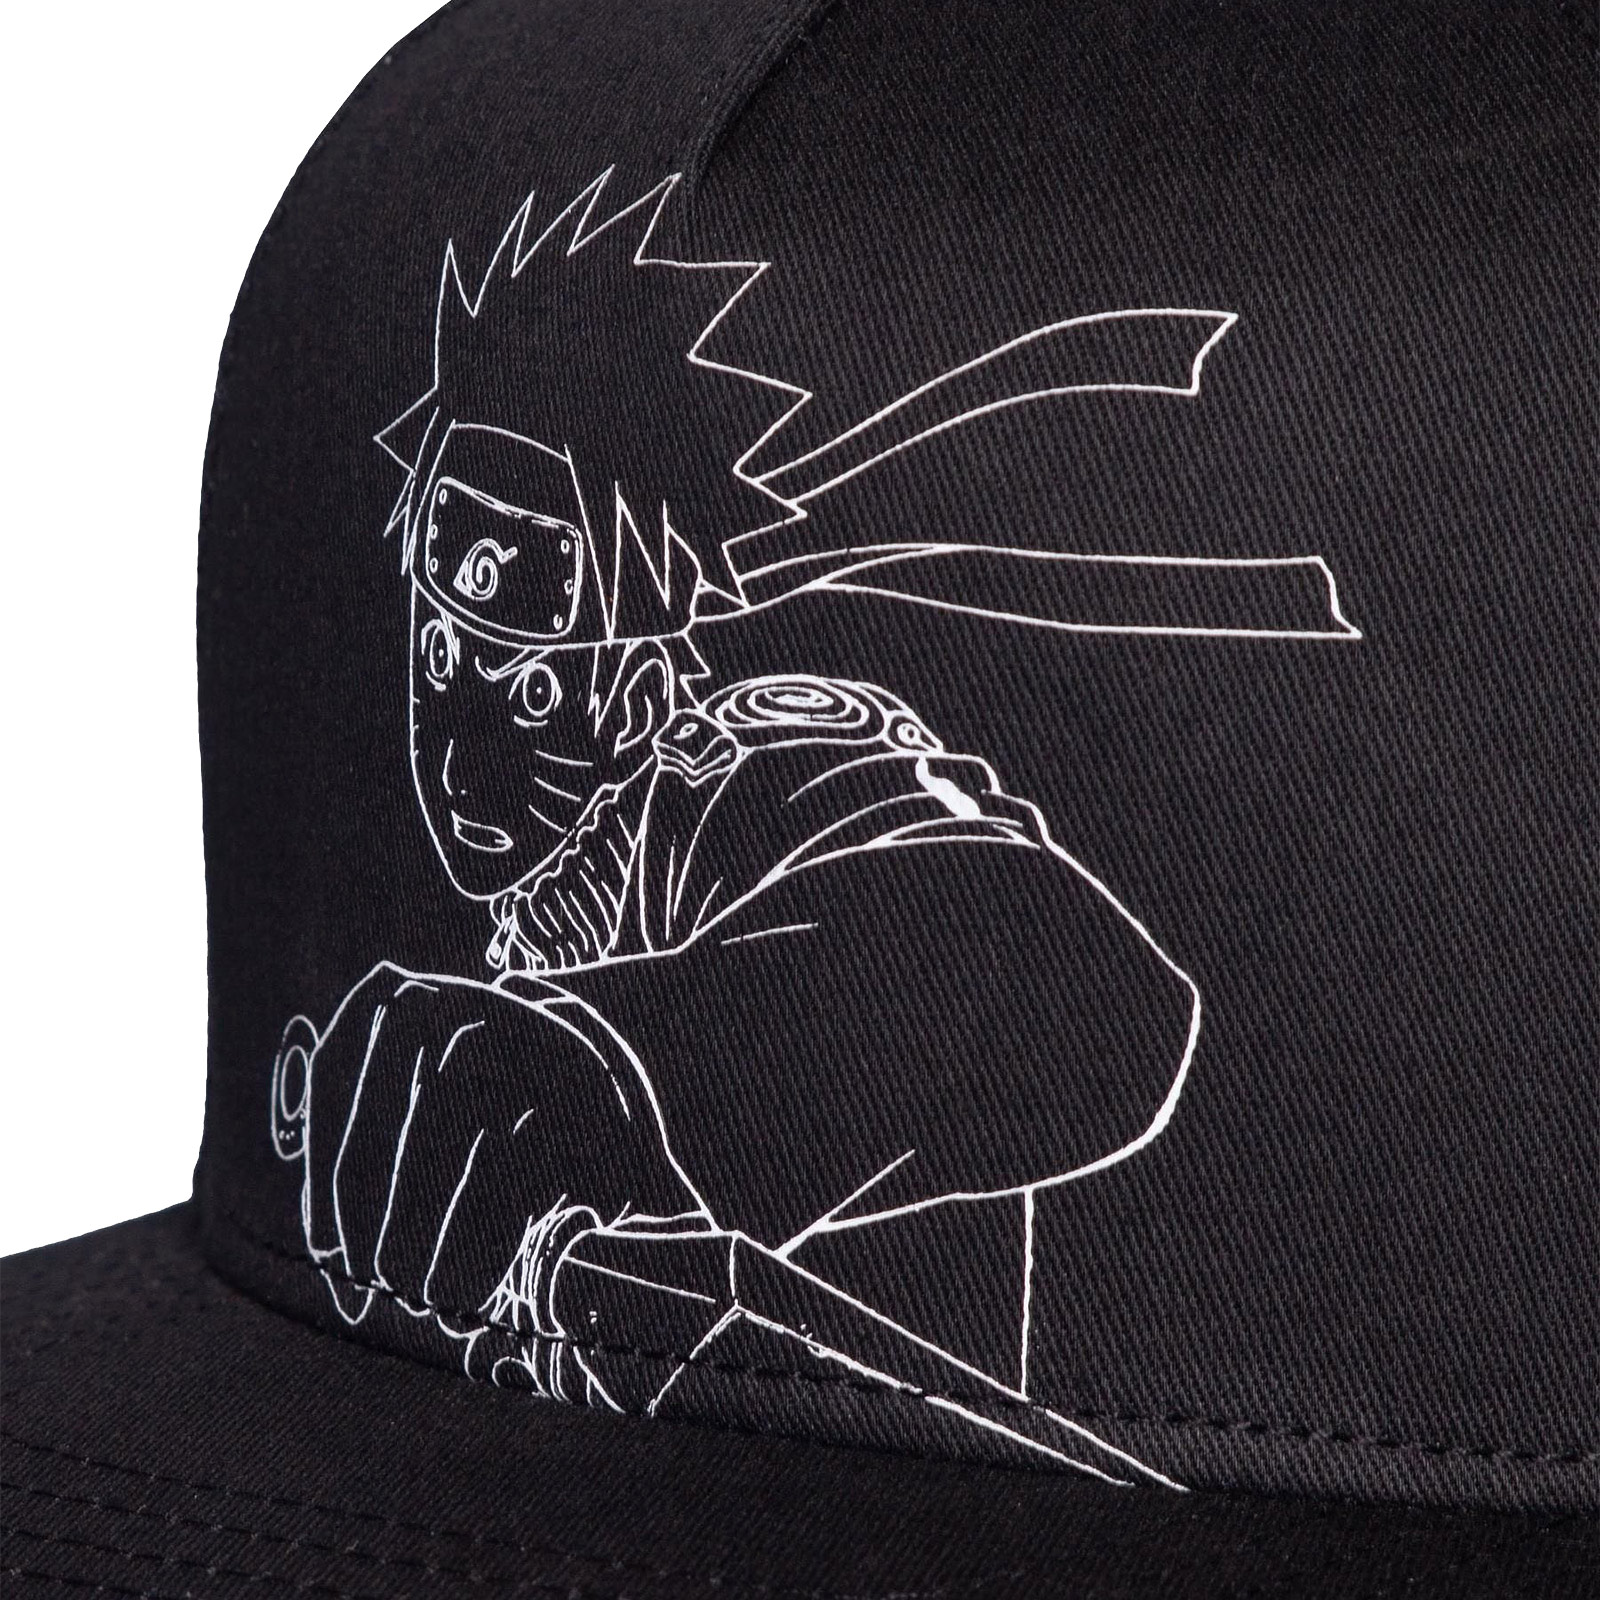 Naruto Shippuden - Outline Characters Snapback Cap